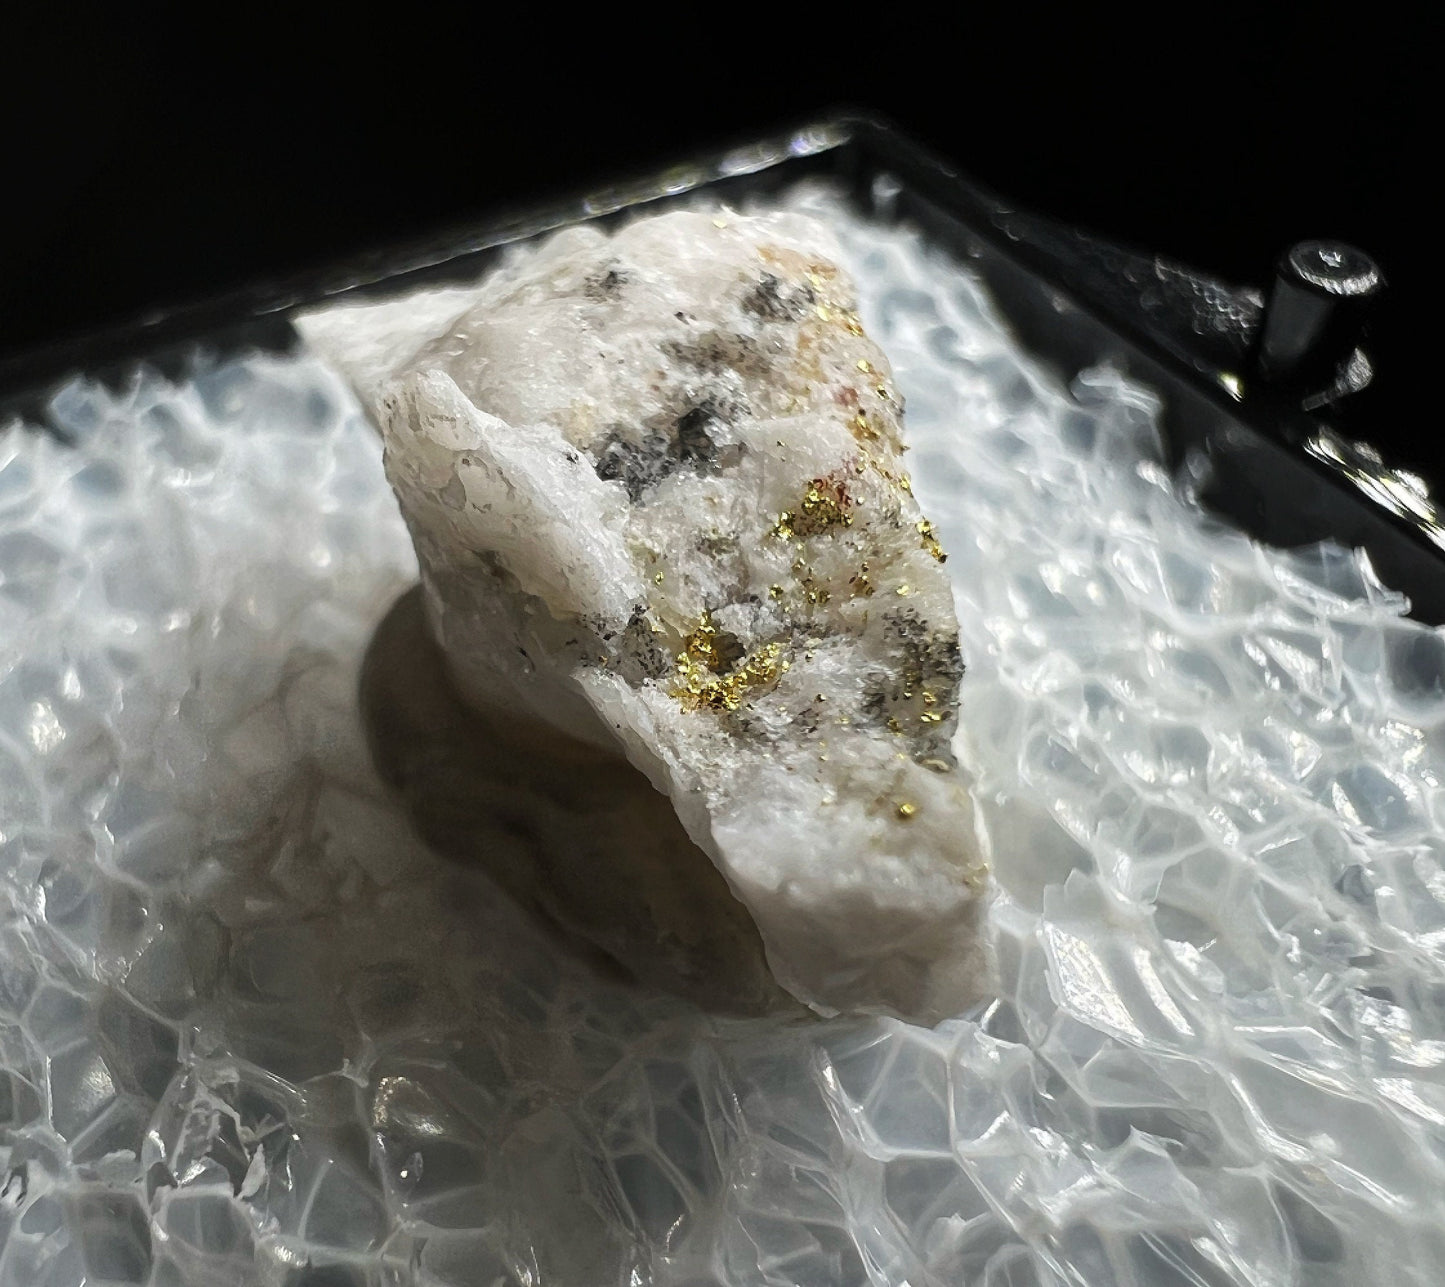 Gold In Quartz From Lecanvey Mine, County Mayo, Ireland- Collectors Piece, Home Décor, Gift (Box Included)